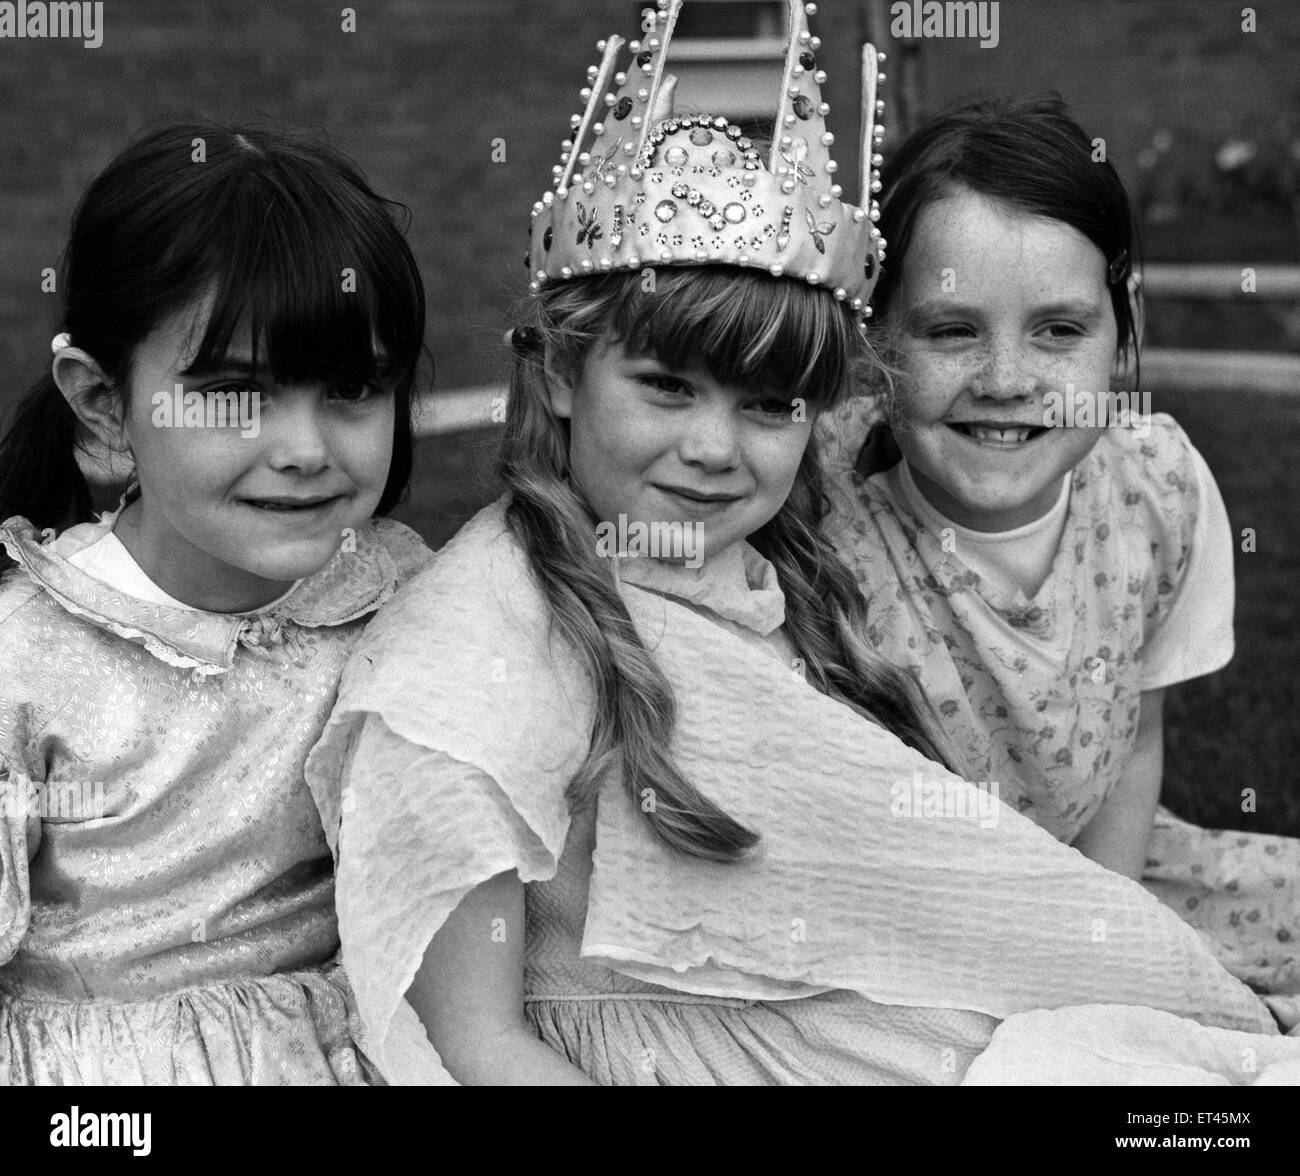 Liverpool May Day Parade, 1st May 1971. Julie Creed aged 8, dressed as ...